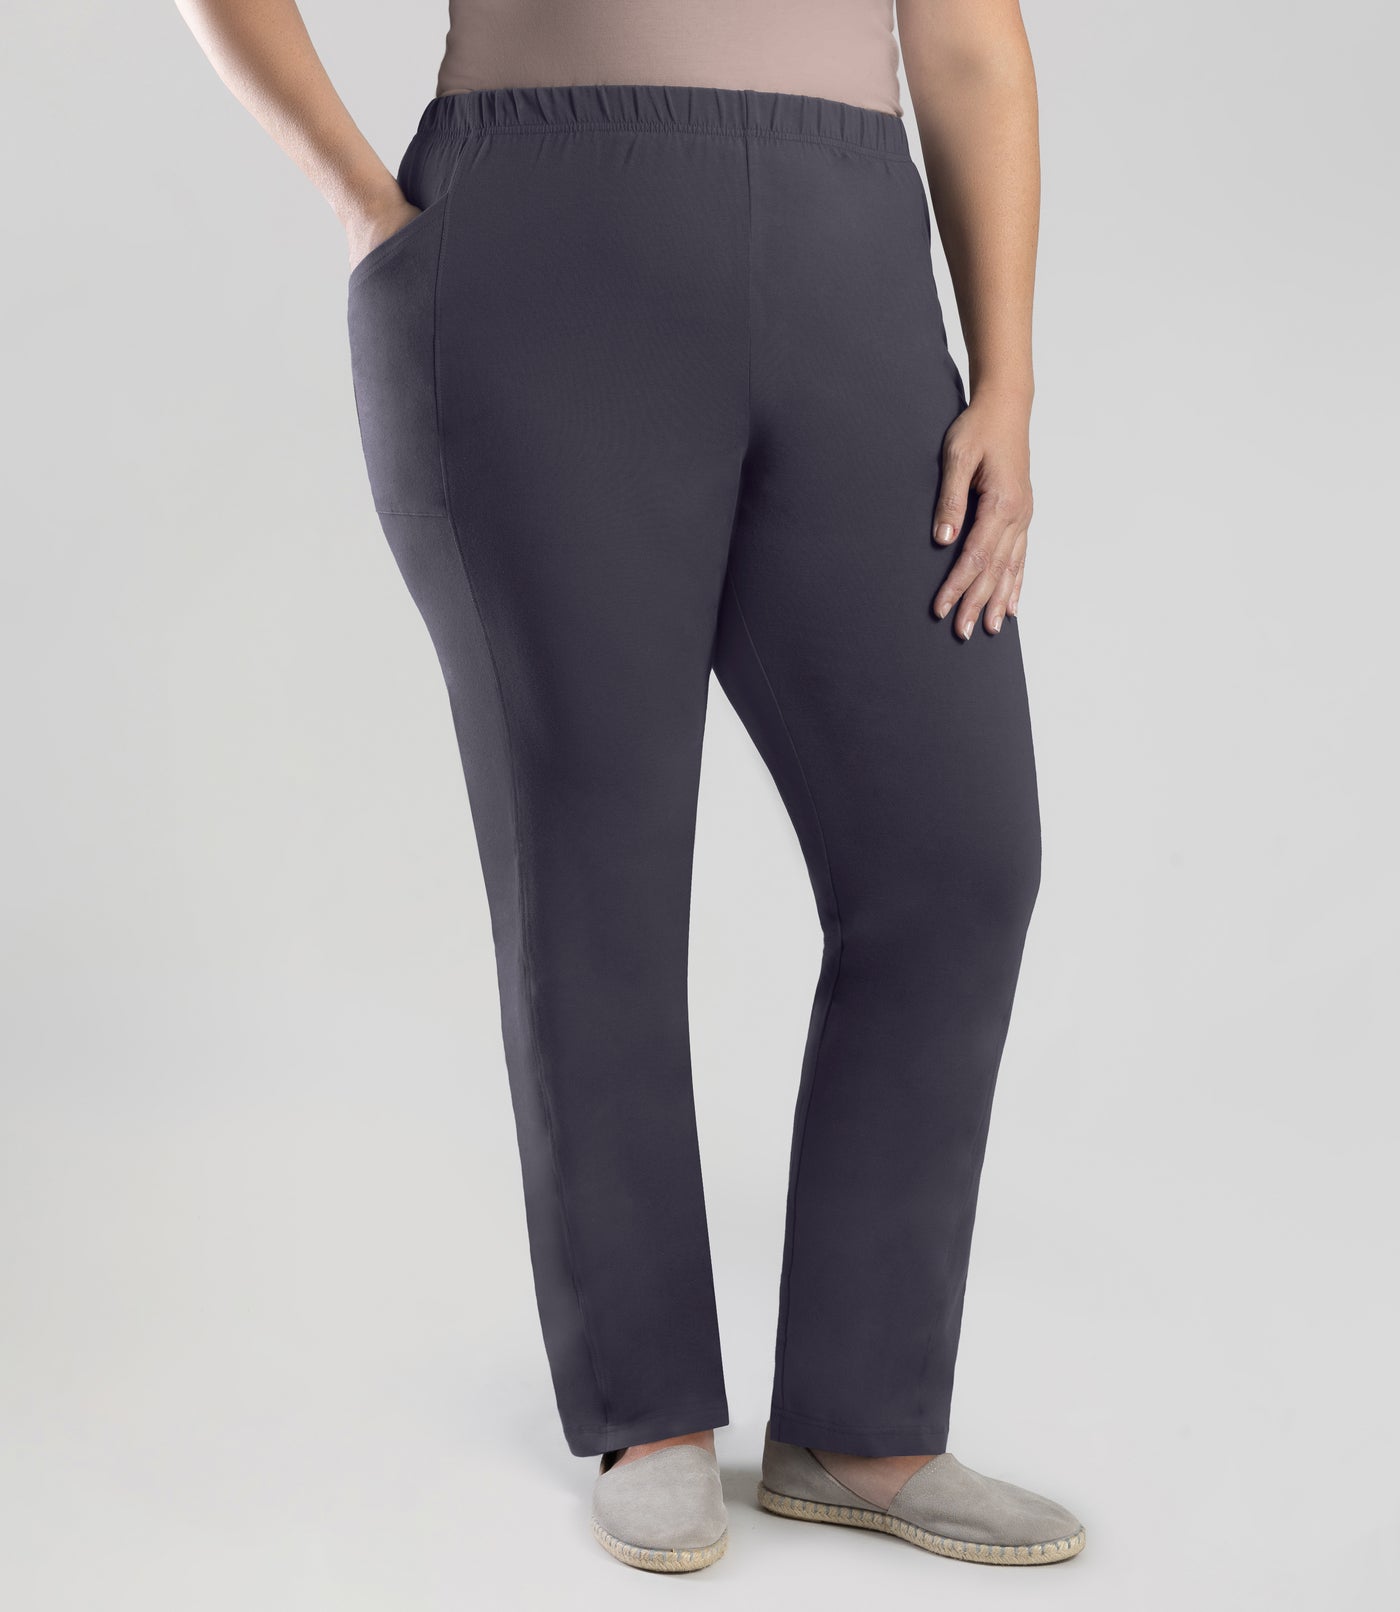 Bottom half of plus sized woman, front view, wearing JunoActive Stretch Naturals Side Pocket Loose Fit Leggings in color oak gray. Bottom hem is at the ankle.